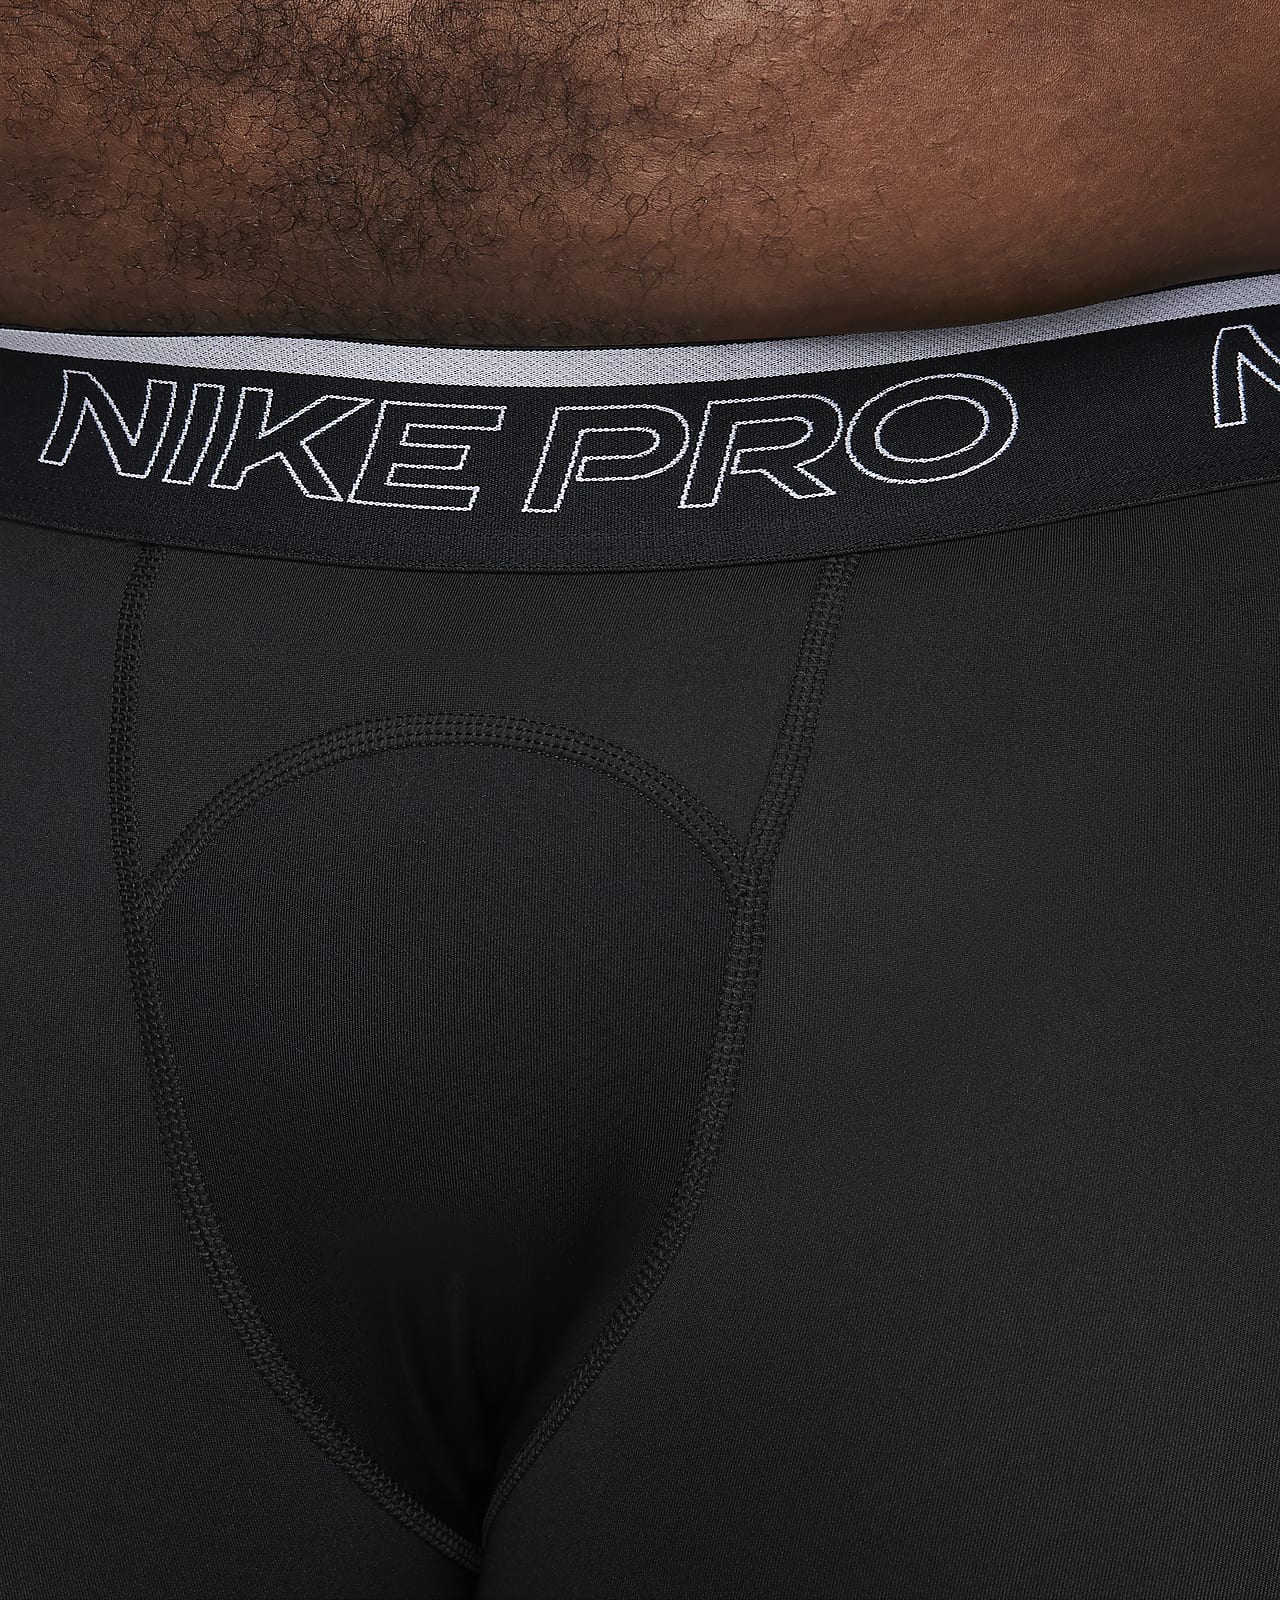 Wearviews on X: Read our review on the Nike Pro Compression tights   #nikepro #mentights #gymwear #activewear #menswear  #menstights #menslegging #bulge #menactivewear #wearviewsreview  #ProductReviews  / X